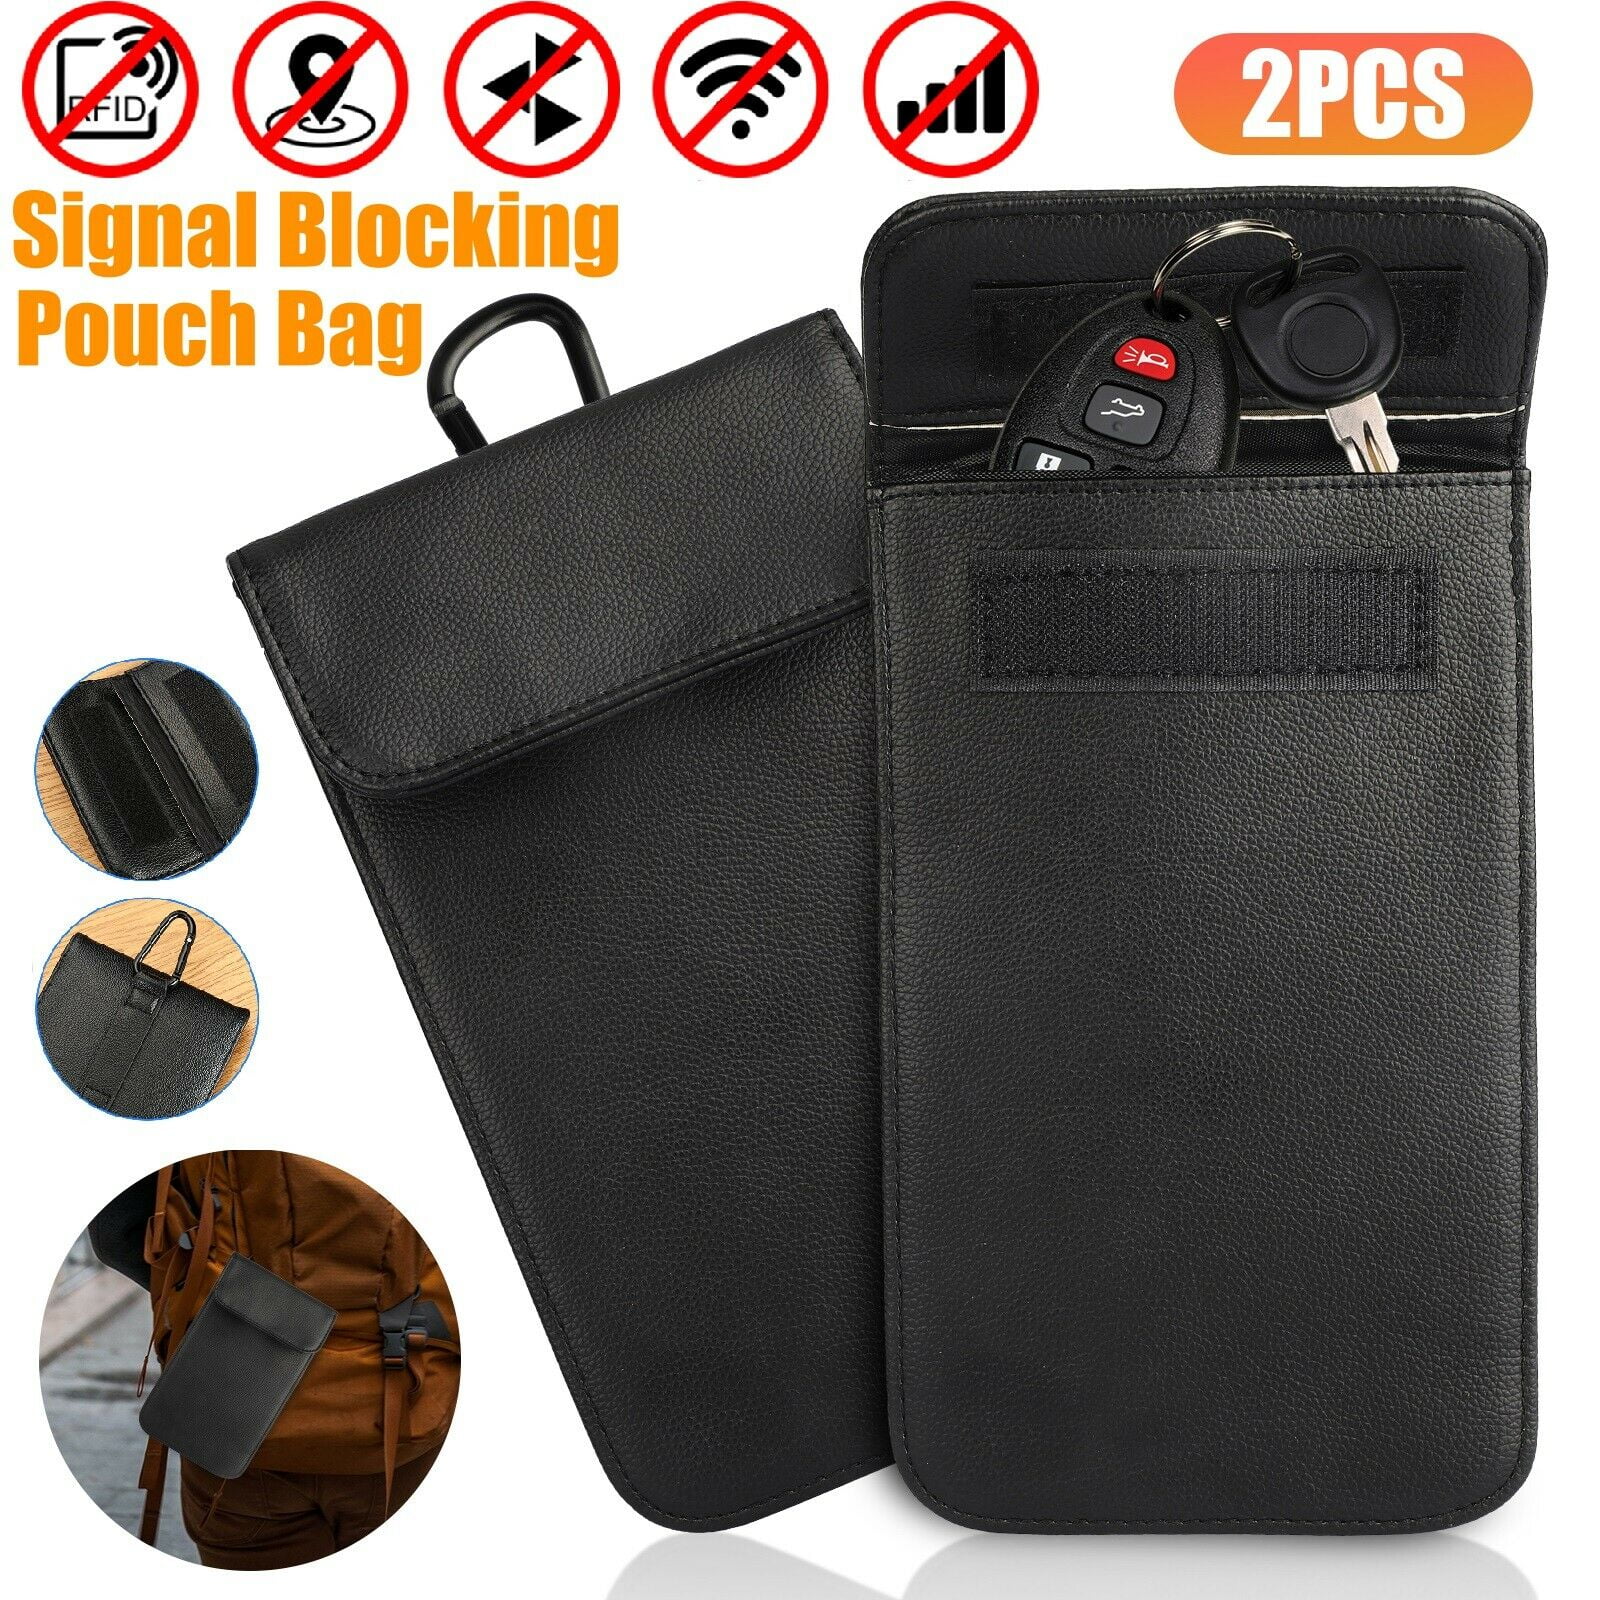 Faraday Dry Bag for Laptop - Waterproof and Signal-Proof - Enhance Your Privacy & Security - Silent Pocket